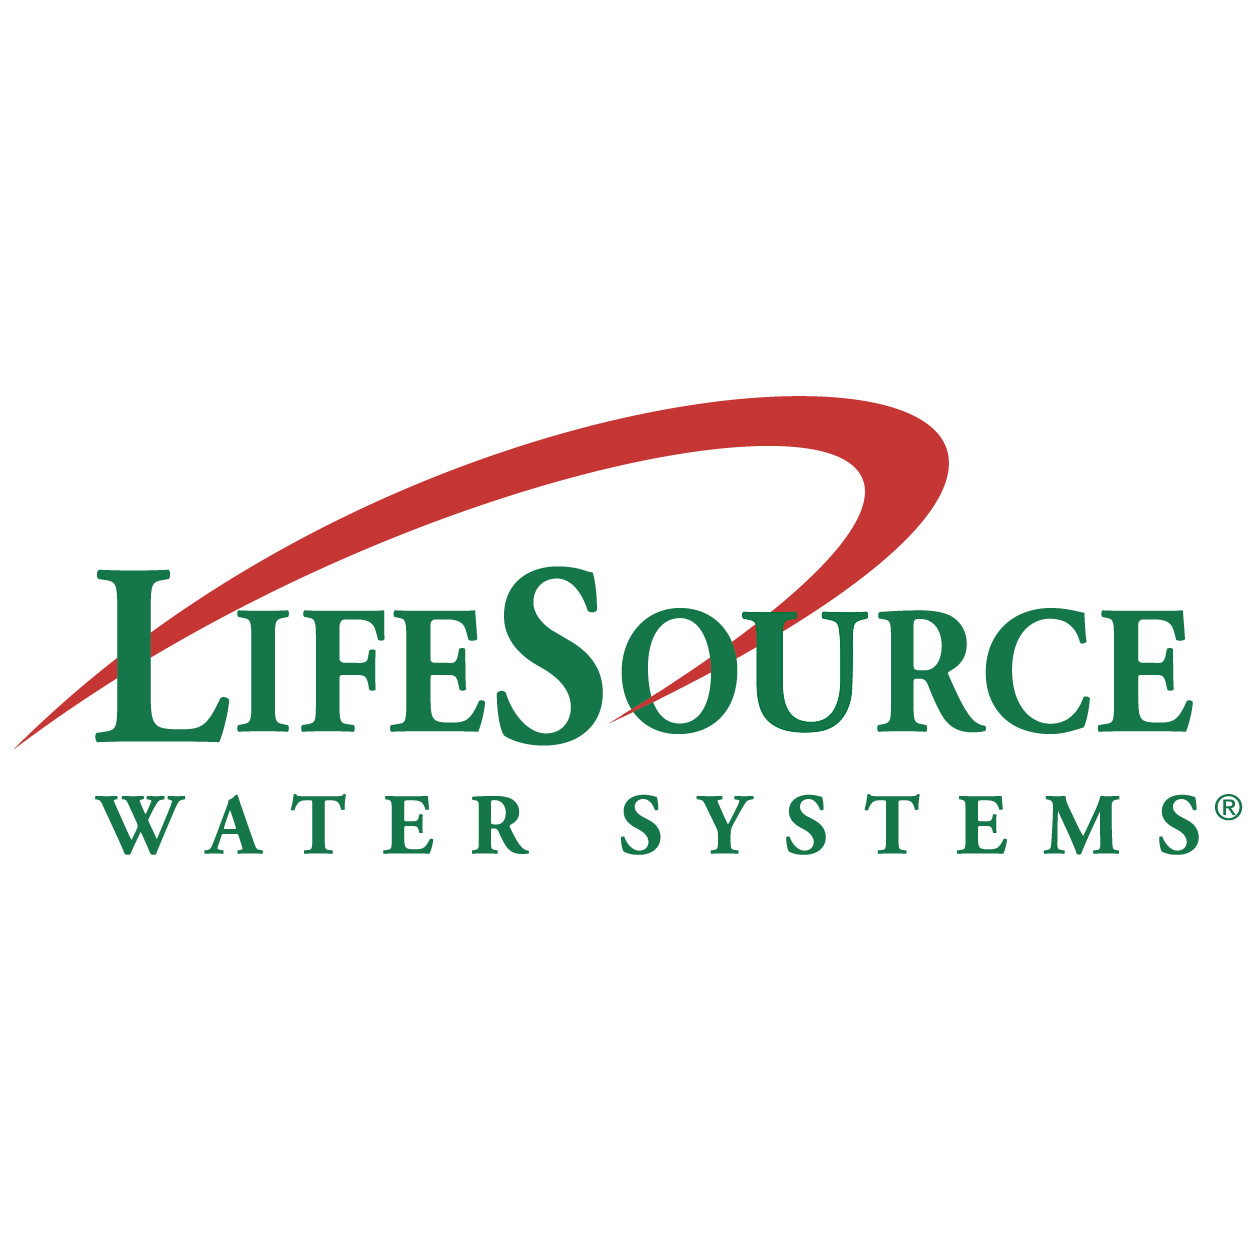 LifeSource Water Systems, Inc. Logo